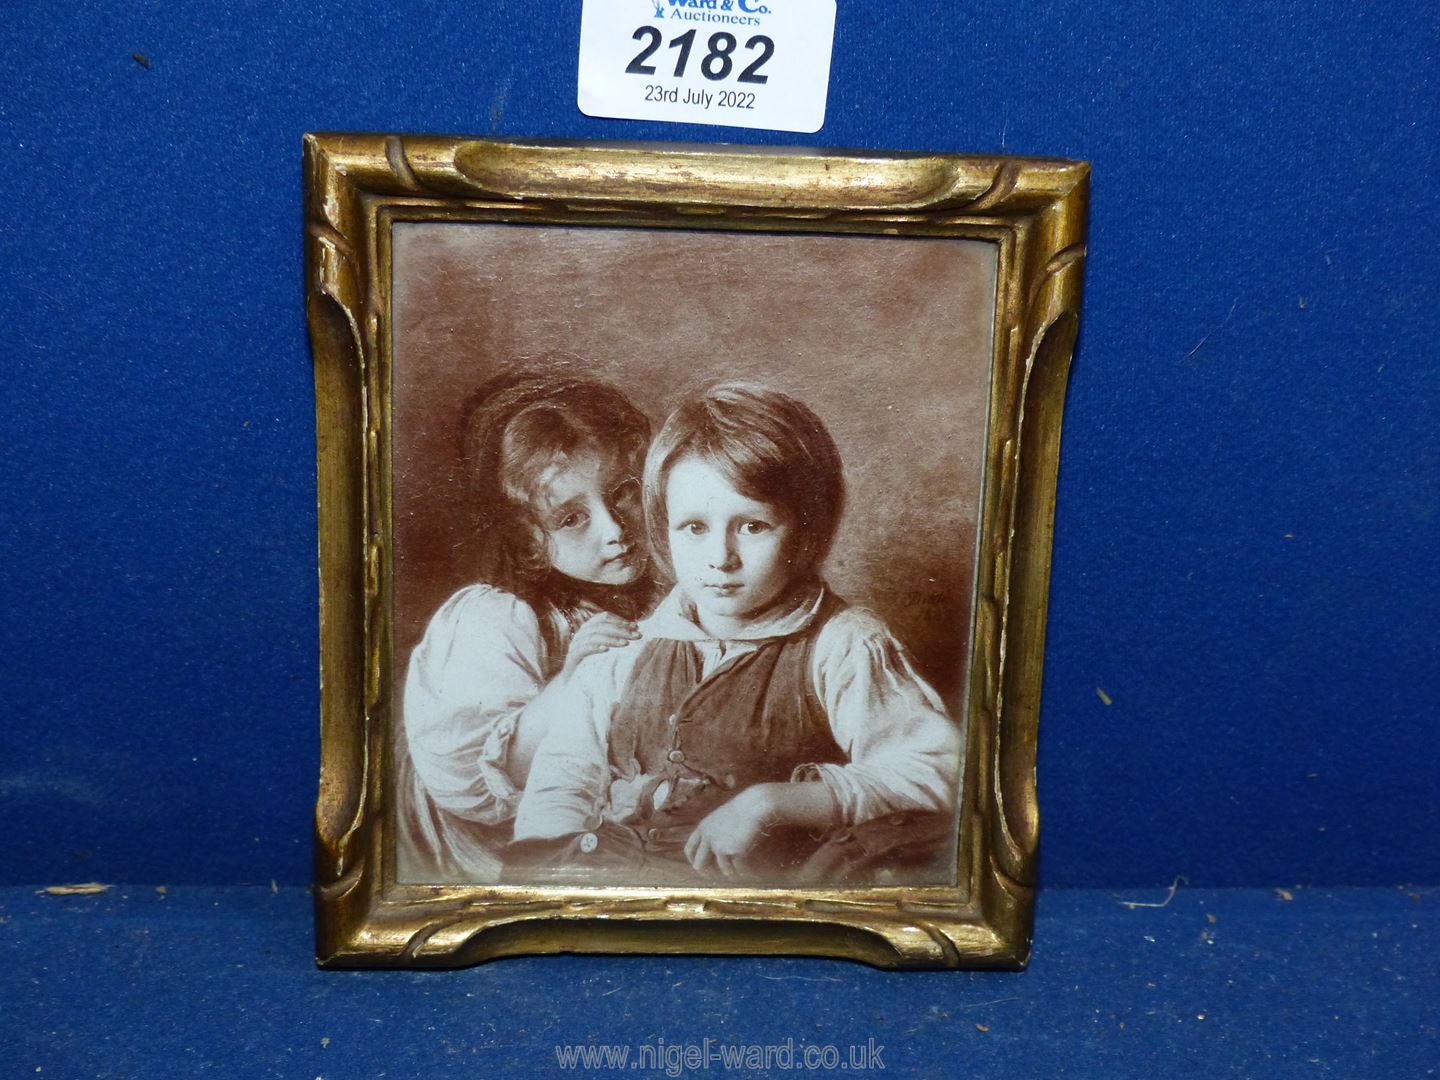 A gold coloured frame containing a sepia Photograph of a portrait of a young girl & boy in early